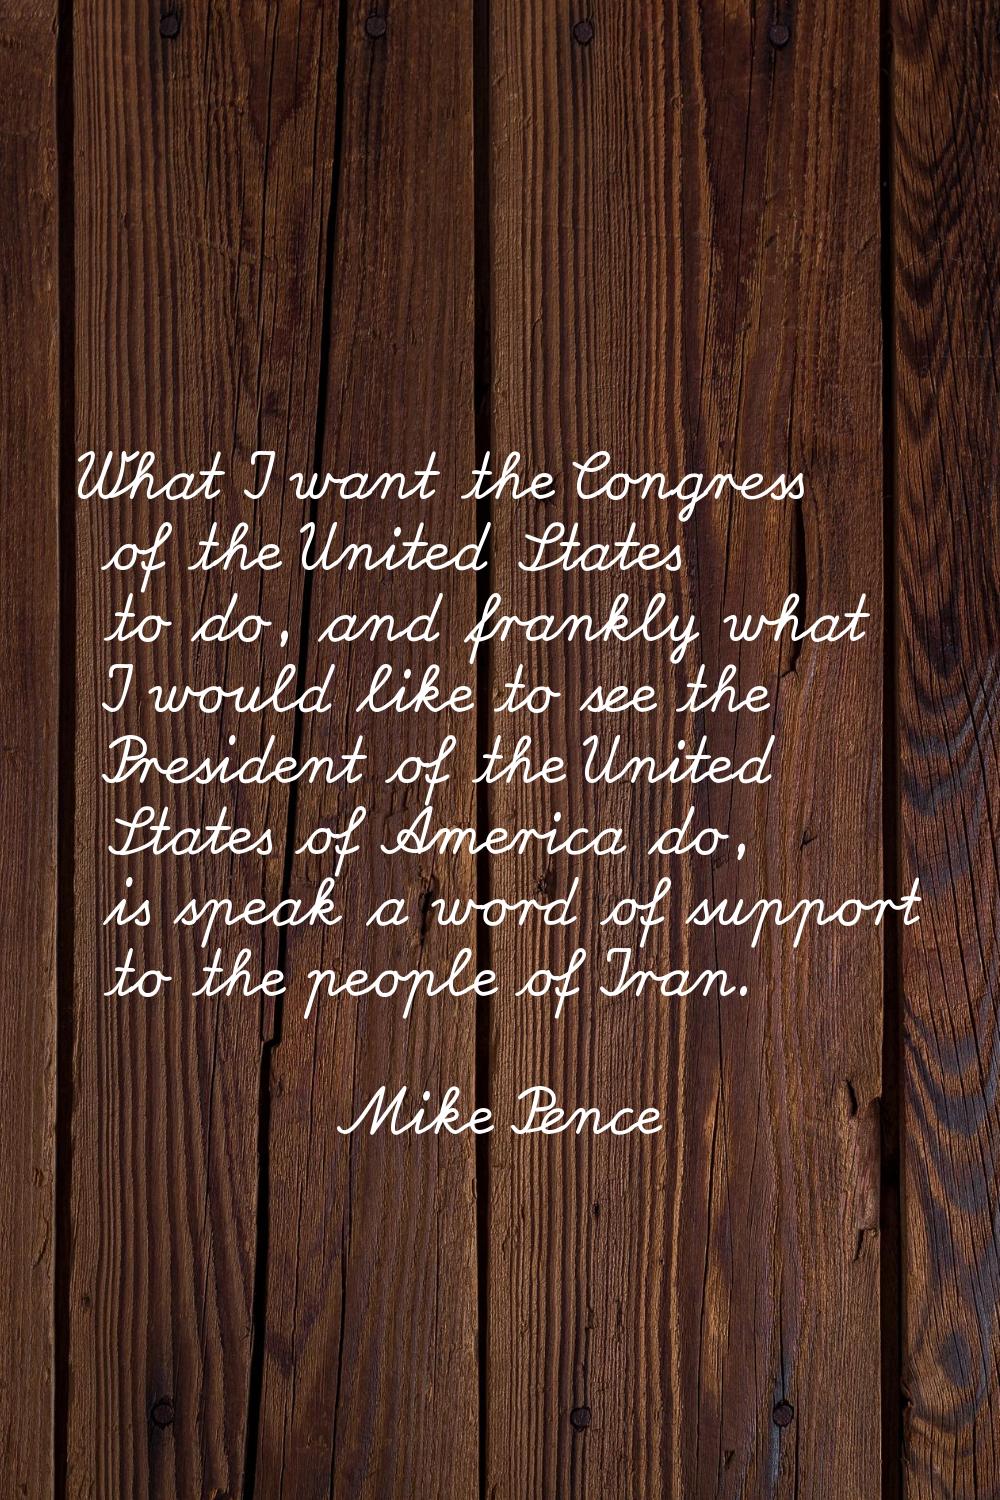 What I want the Congress of the United States to do, and frankly what I would like to see the Presi